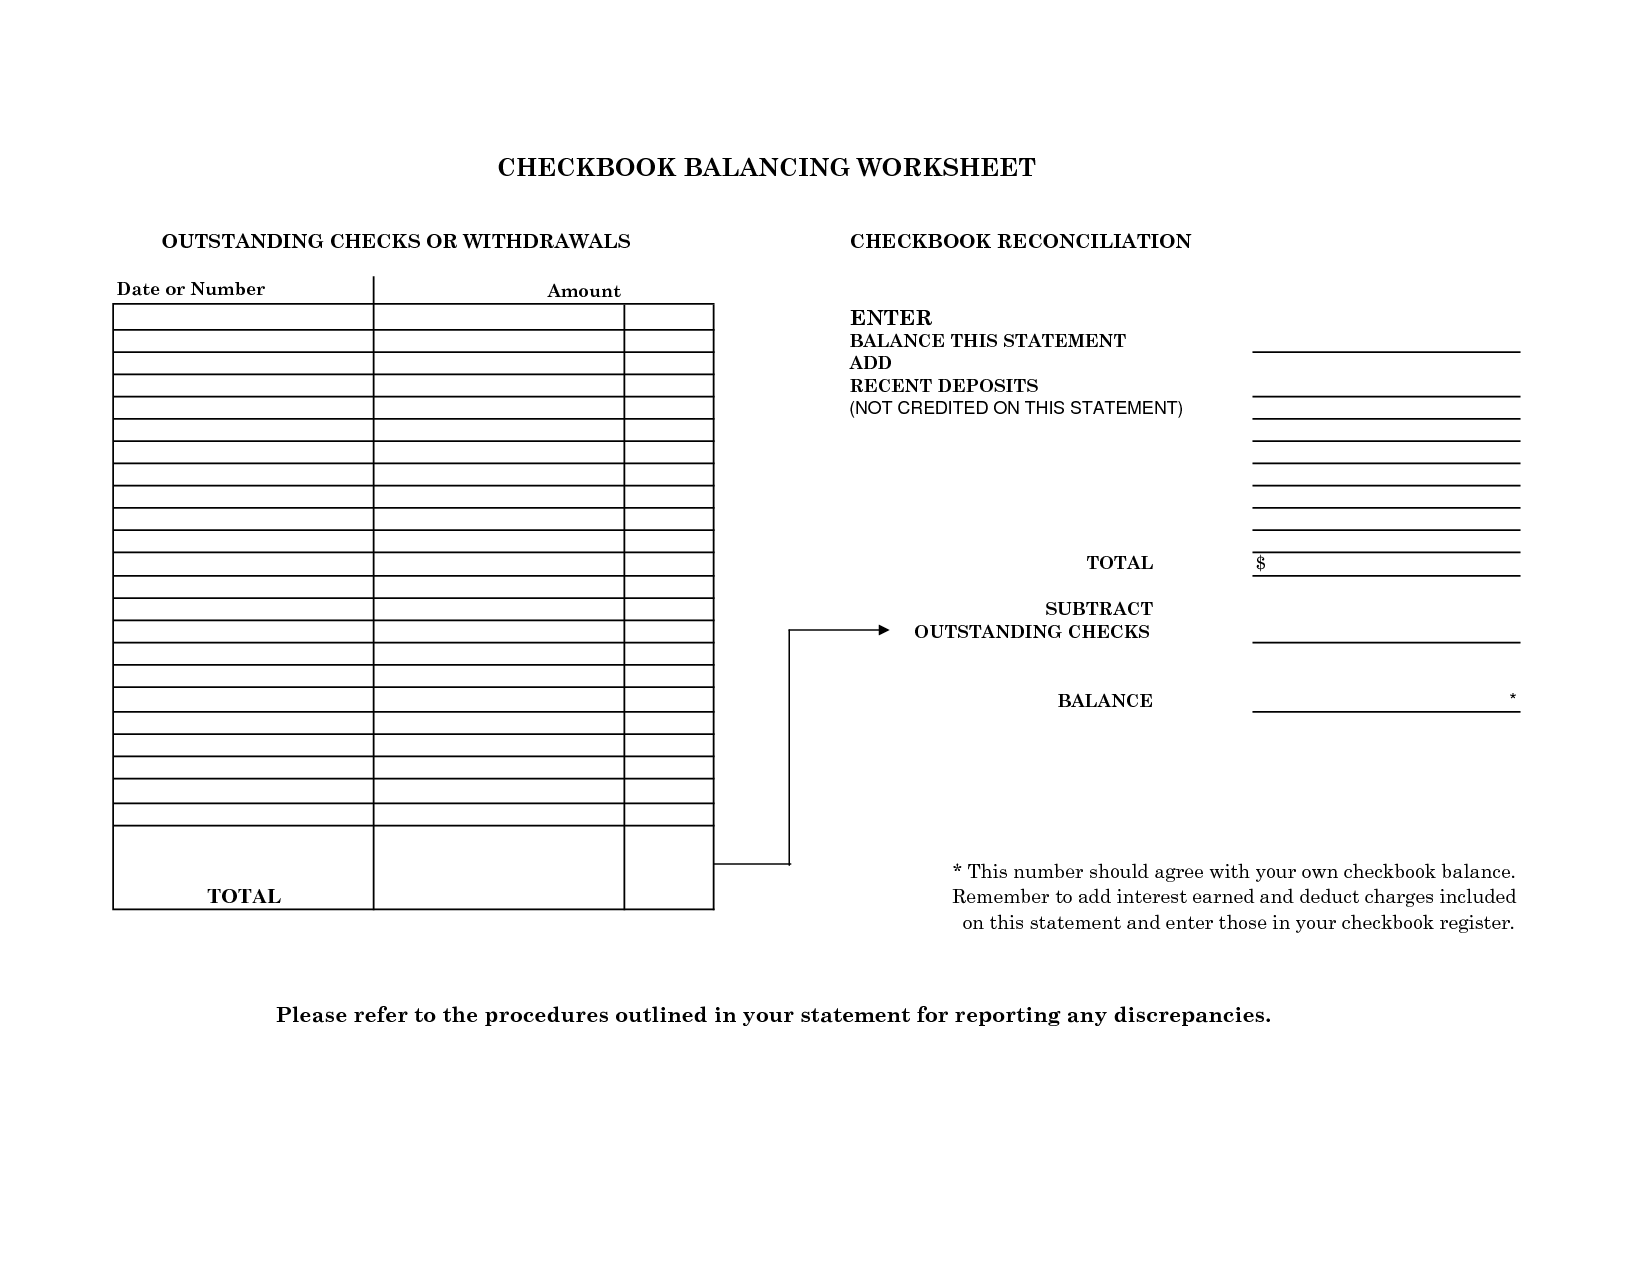 checkbook-reconciliation-practice-worksheets-best-photos-of-blank